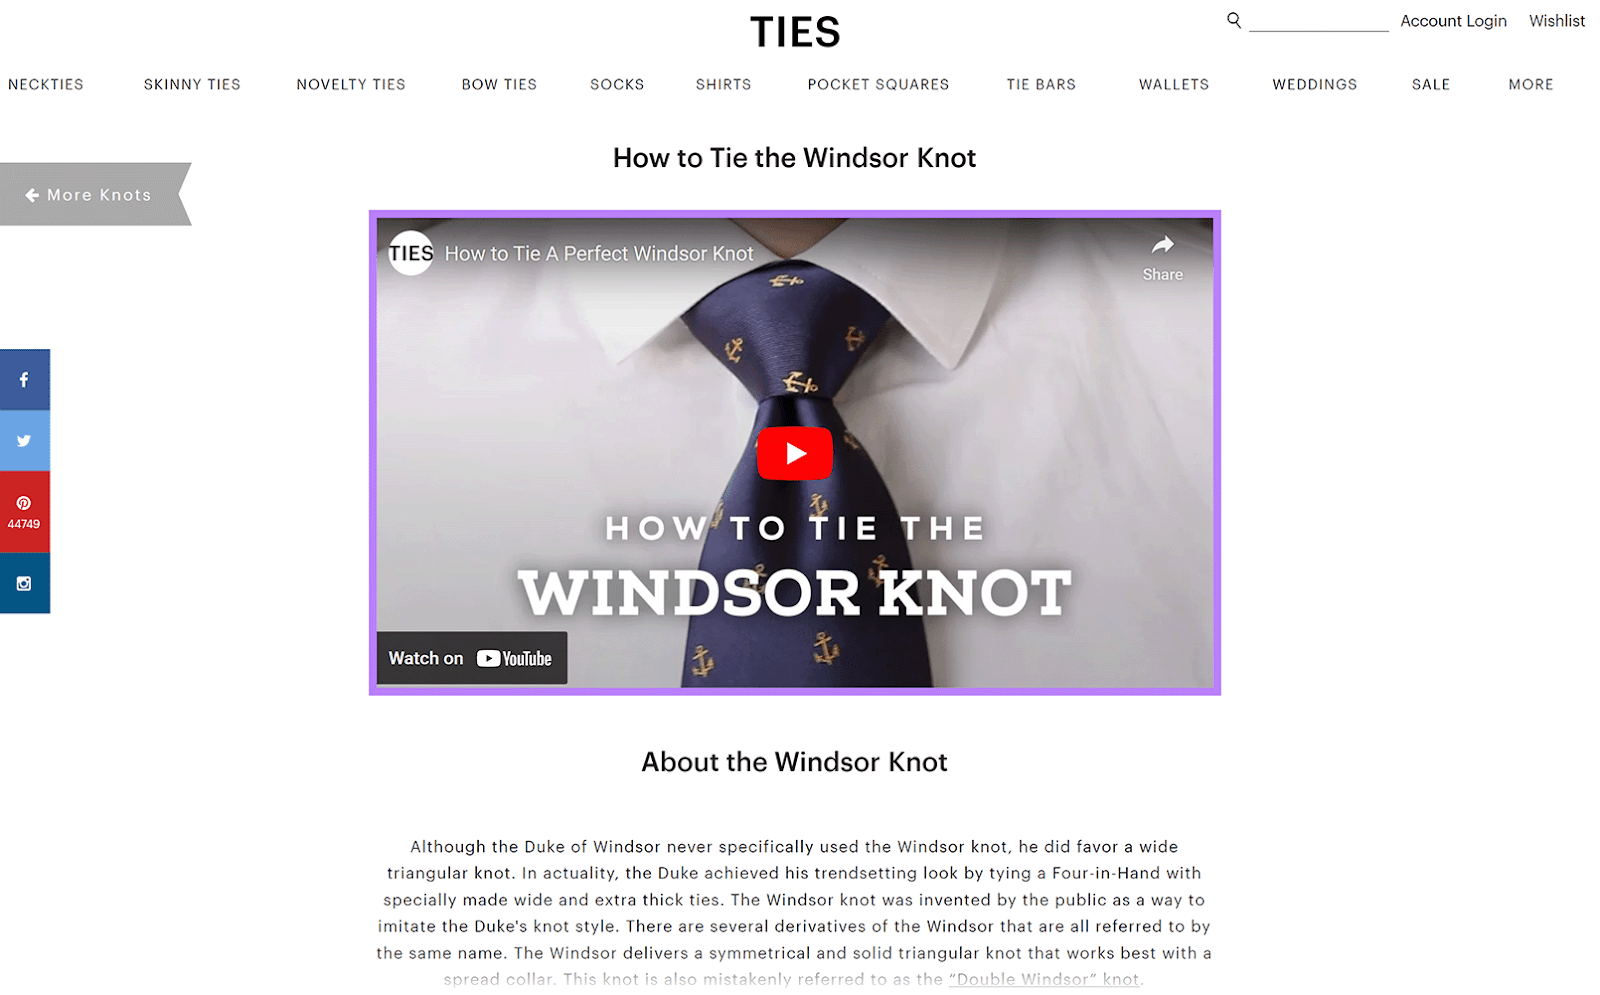 How to tie a Windsor knot blog post with embedded YouTube video.